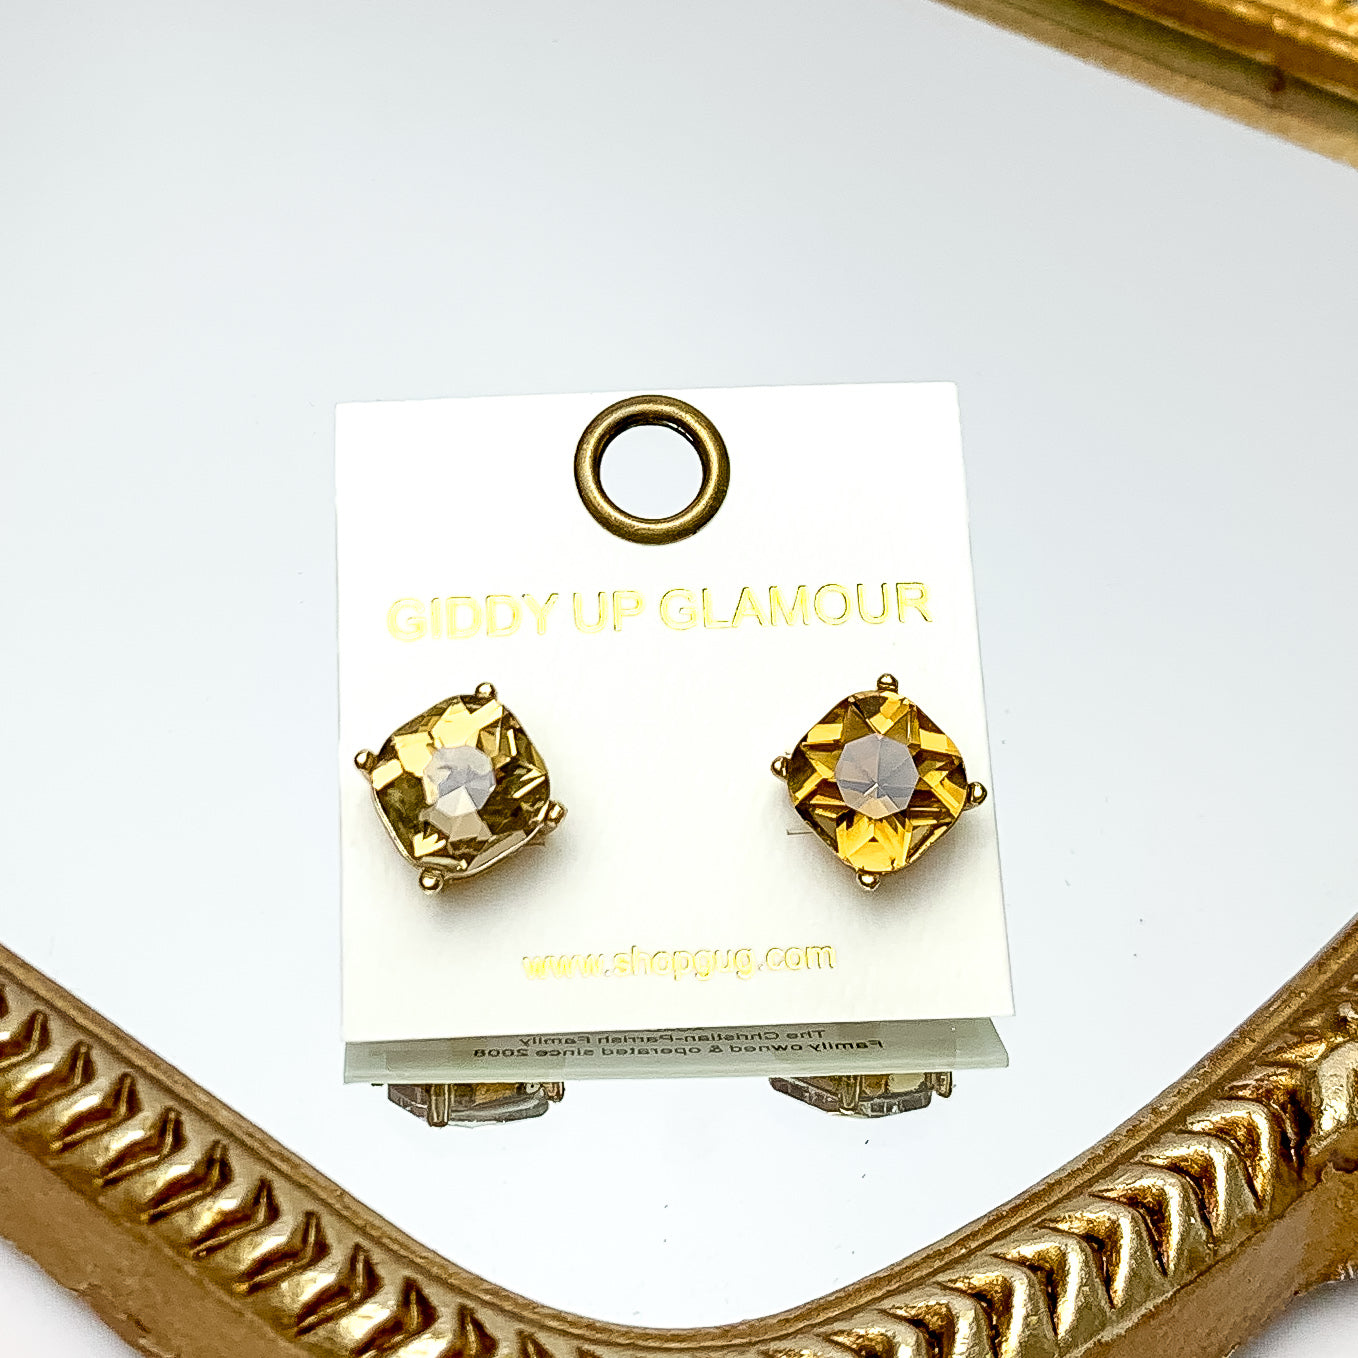 Large Crystal Stud Earrings in Olive Green. These earrings are pictured laying on a gold trimmed mirror.